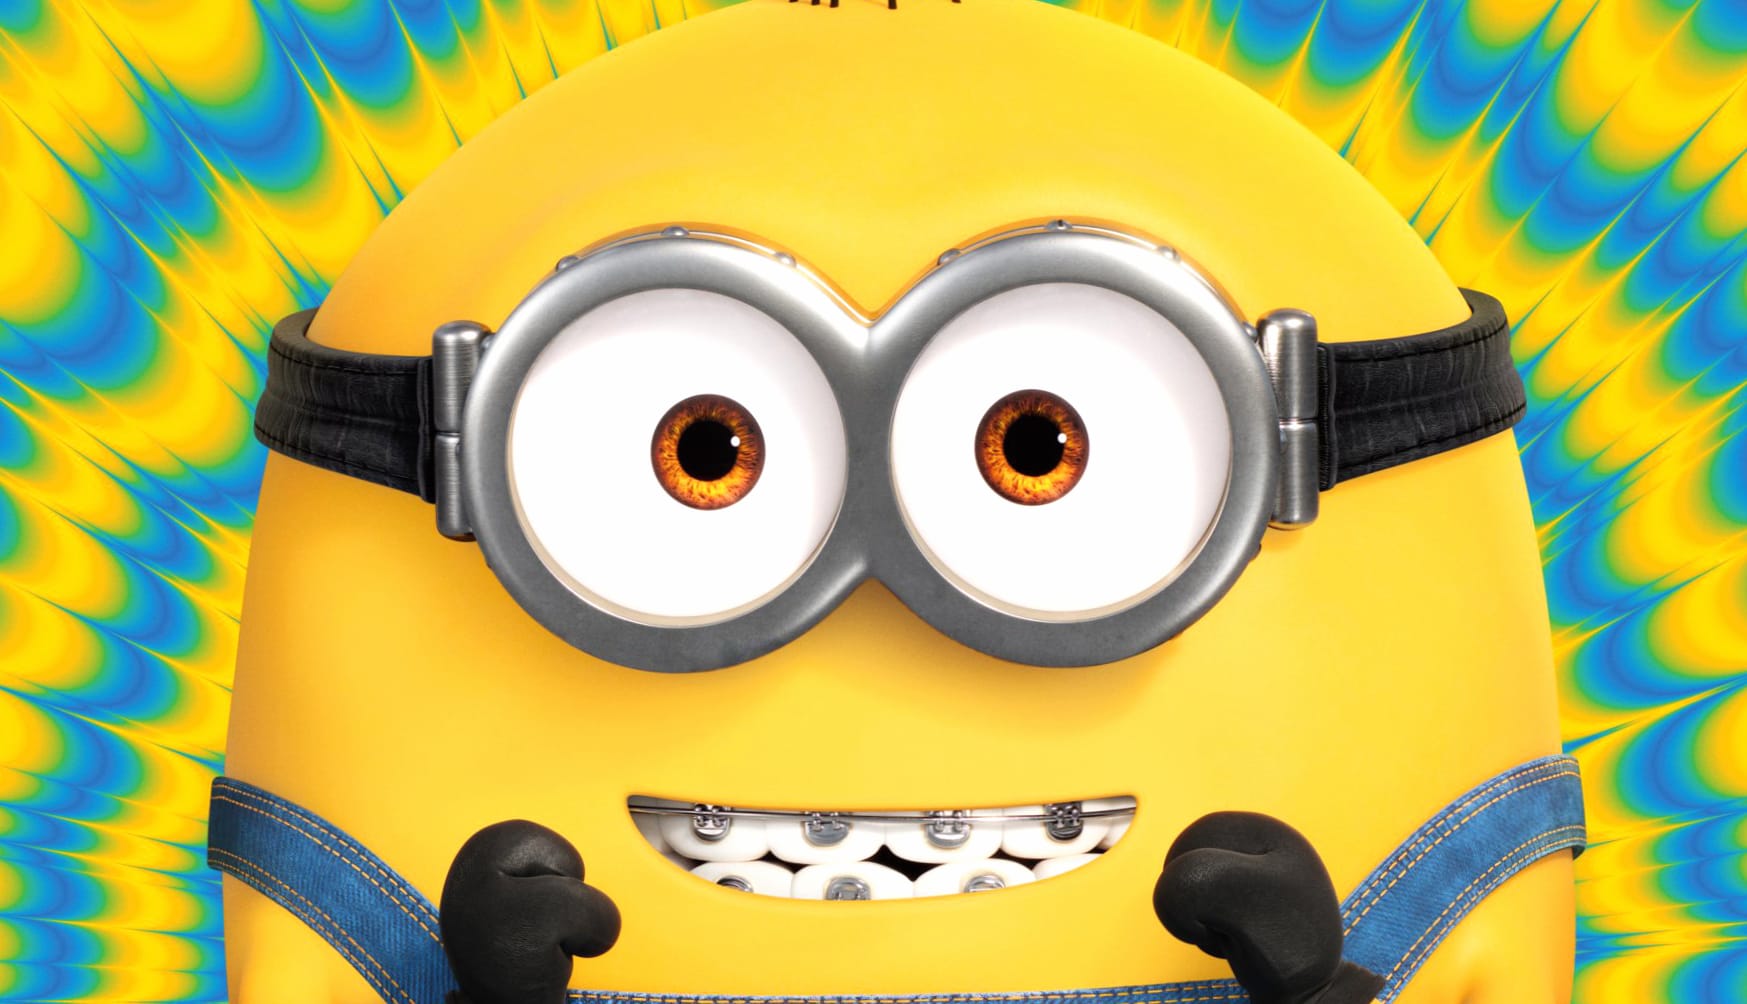 Minions The Rise of Gru wallpapers HD quality